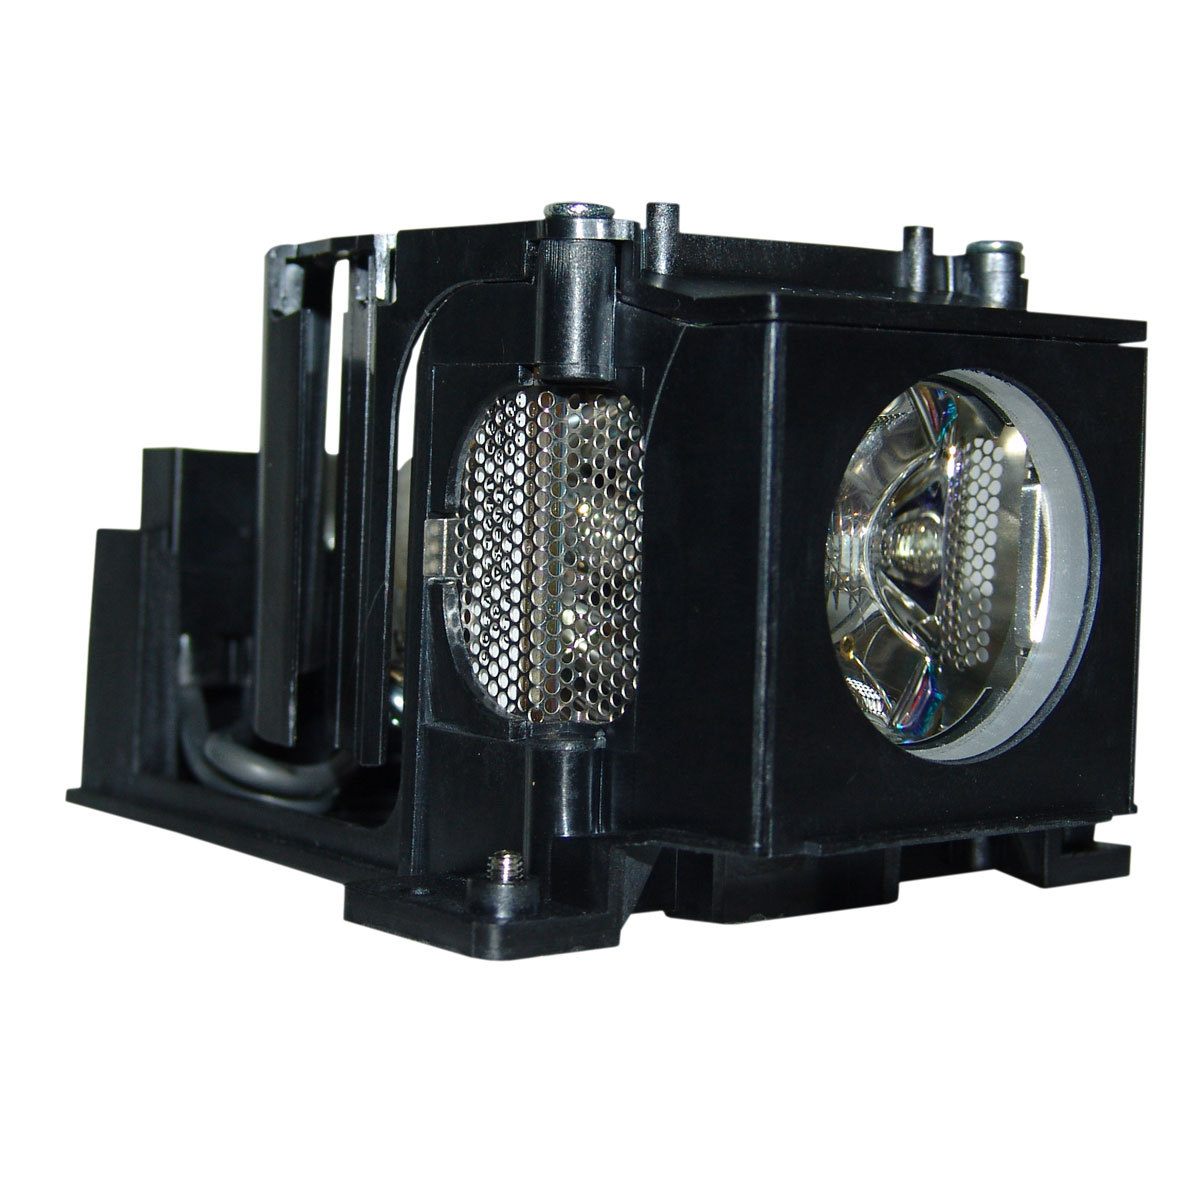 Primary image for AV Vision POA-LMP107 Philips Projector Lamp Module